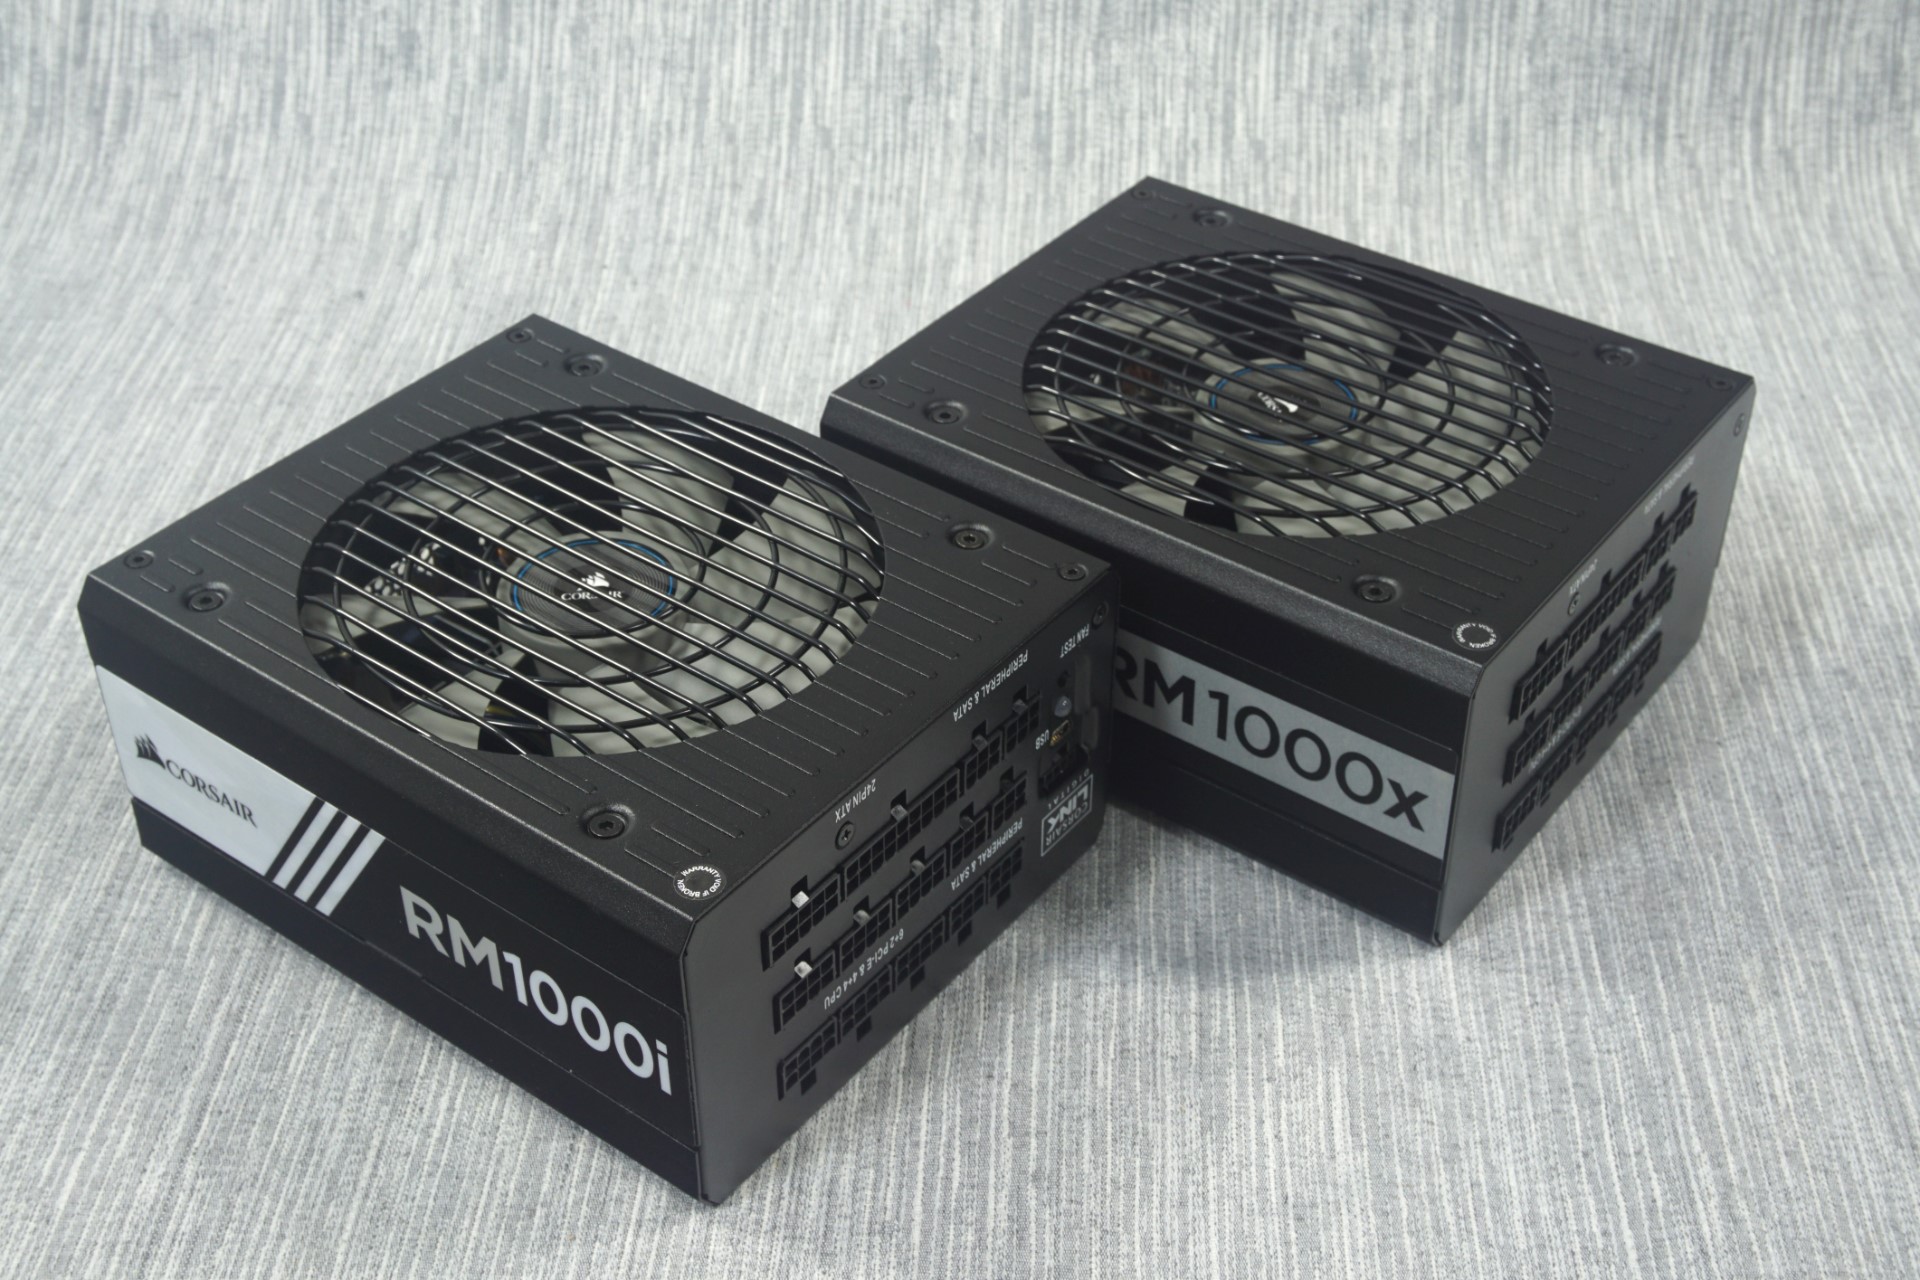 The Corsair RM1000i & RM1000x PSUs Corsair RM1000x and RM1000i Power Supply Review